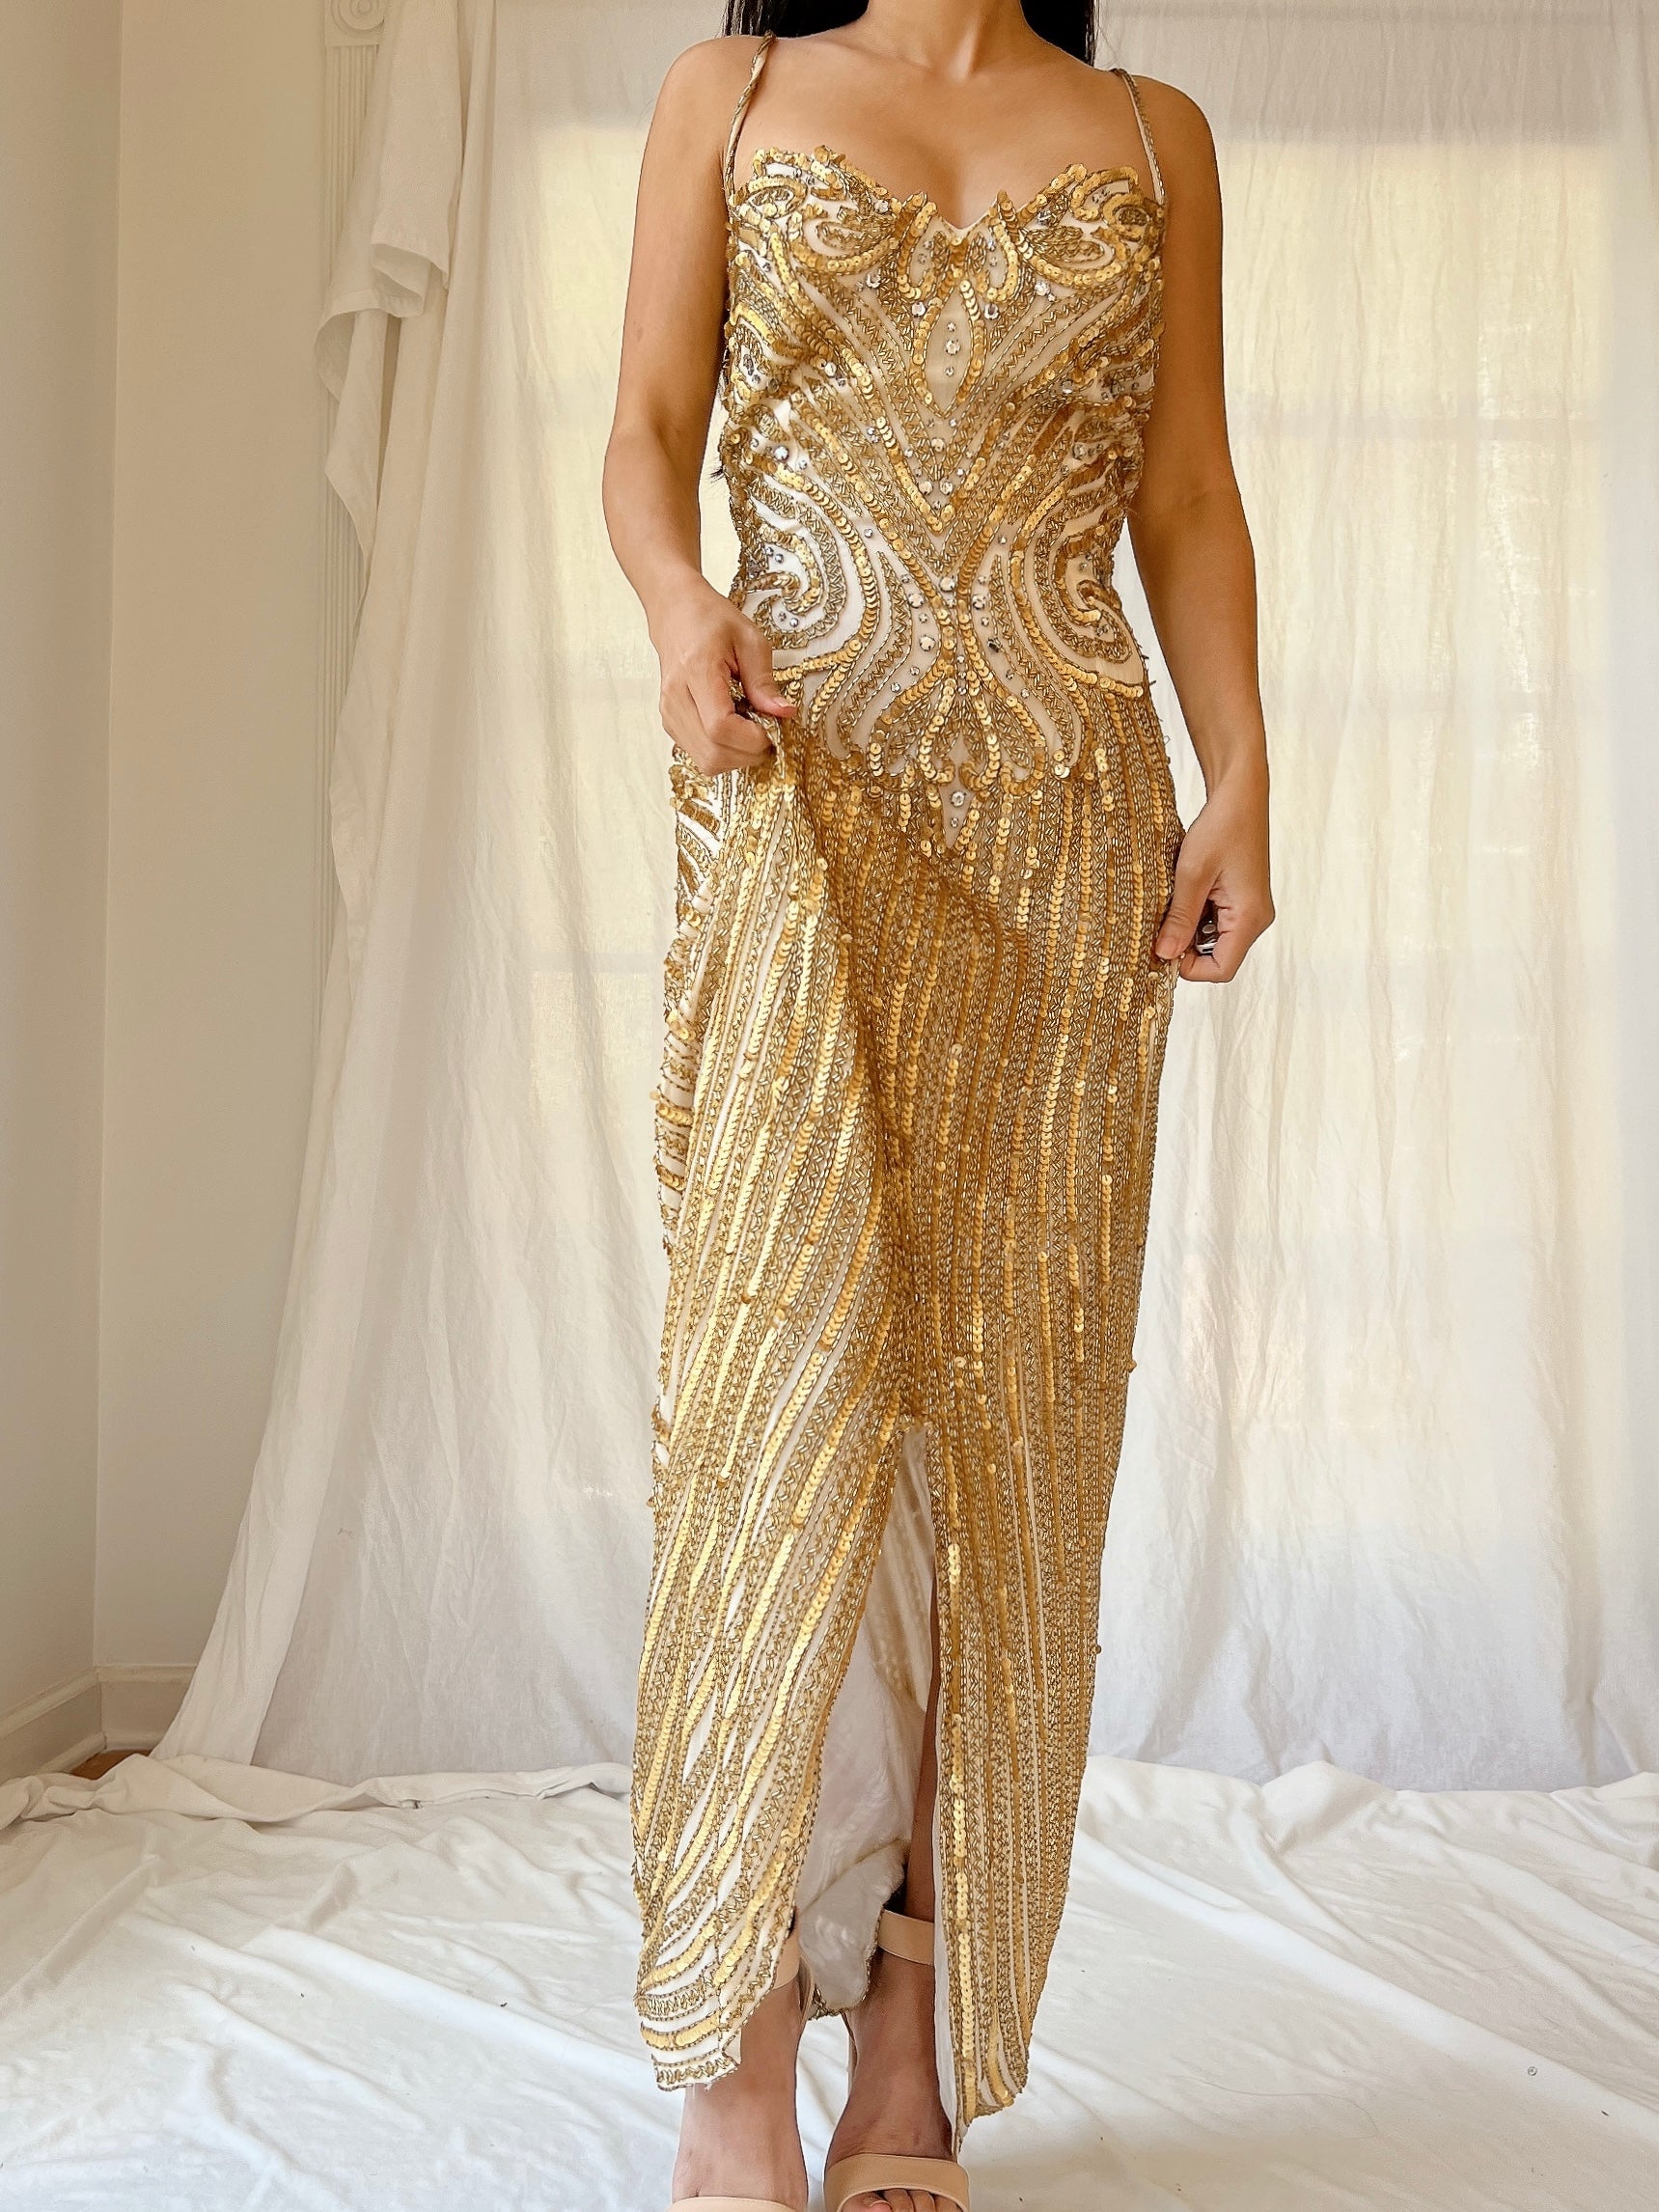 1980s Lillie Rubin Gold Gown - L